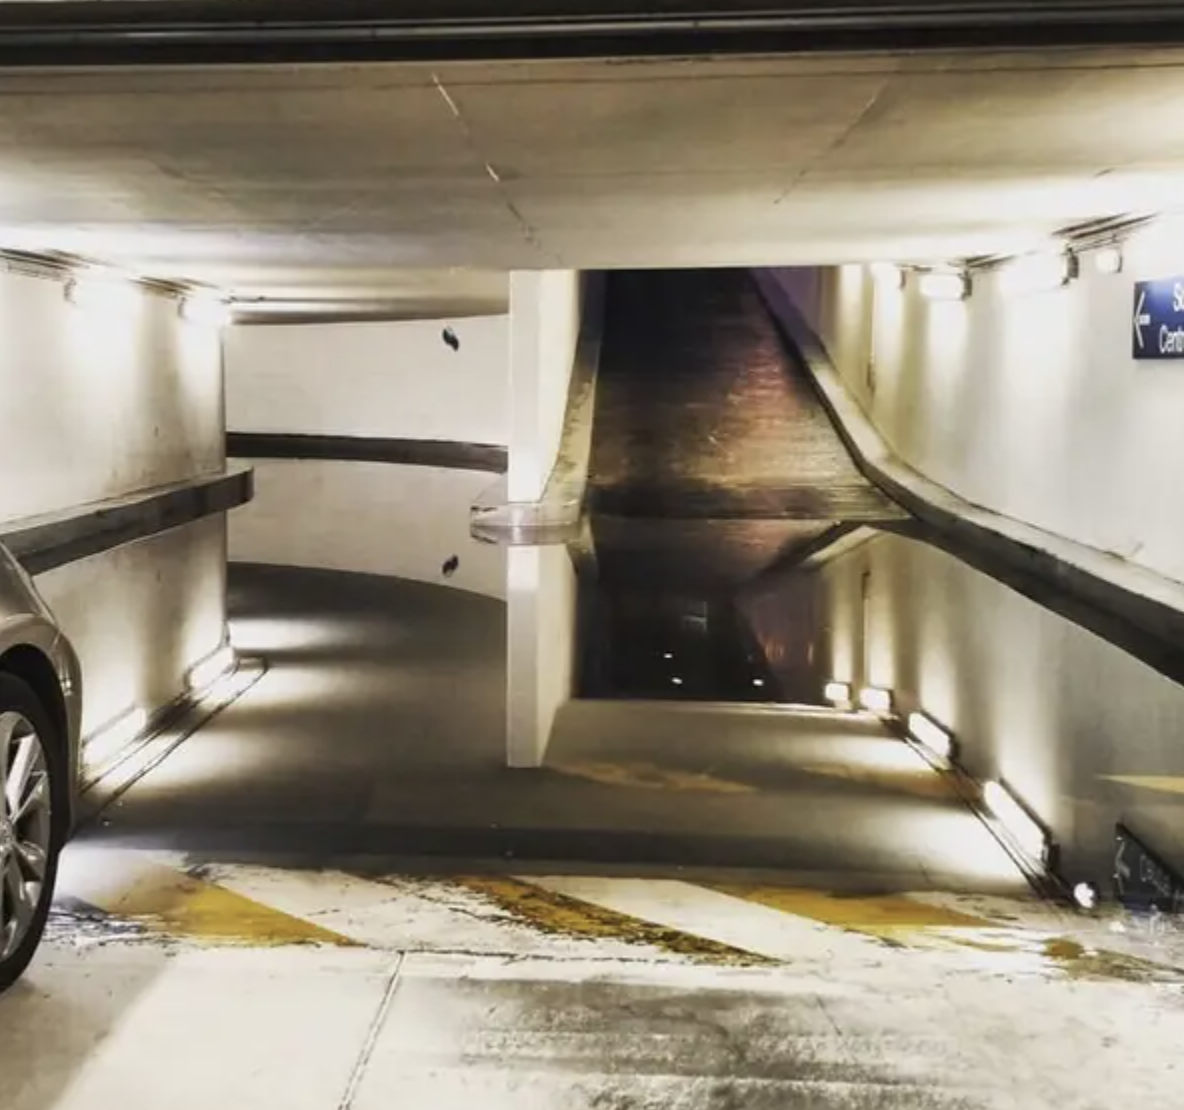 An empty parking garage ramp with lighting along the path and a car partially visible